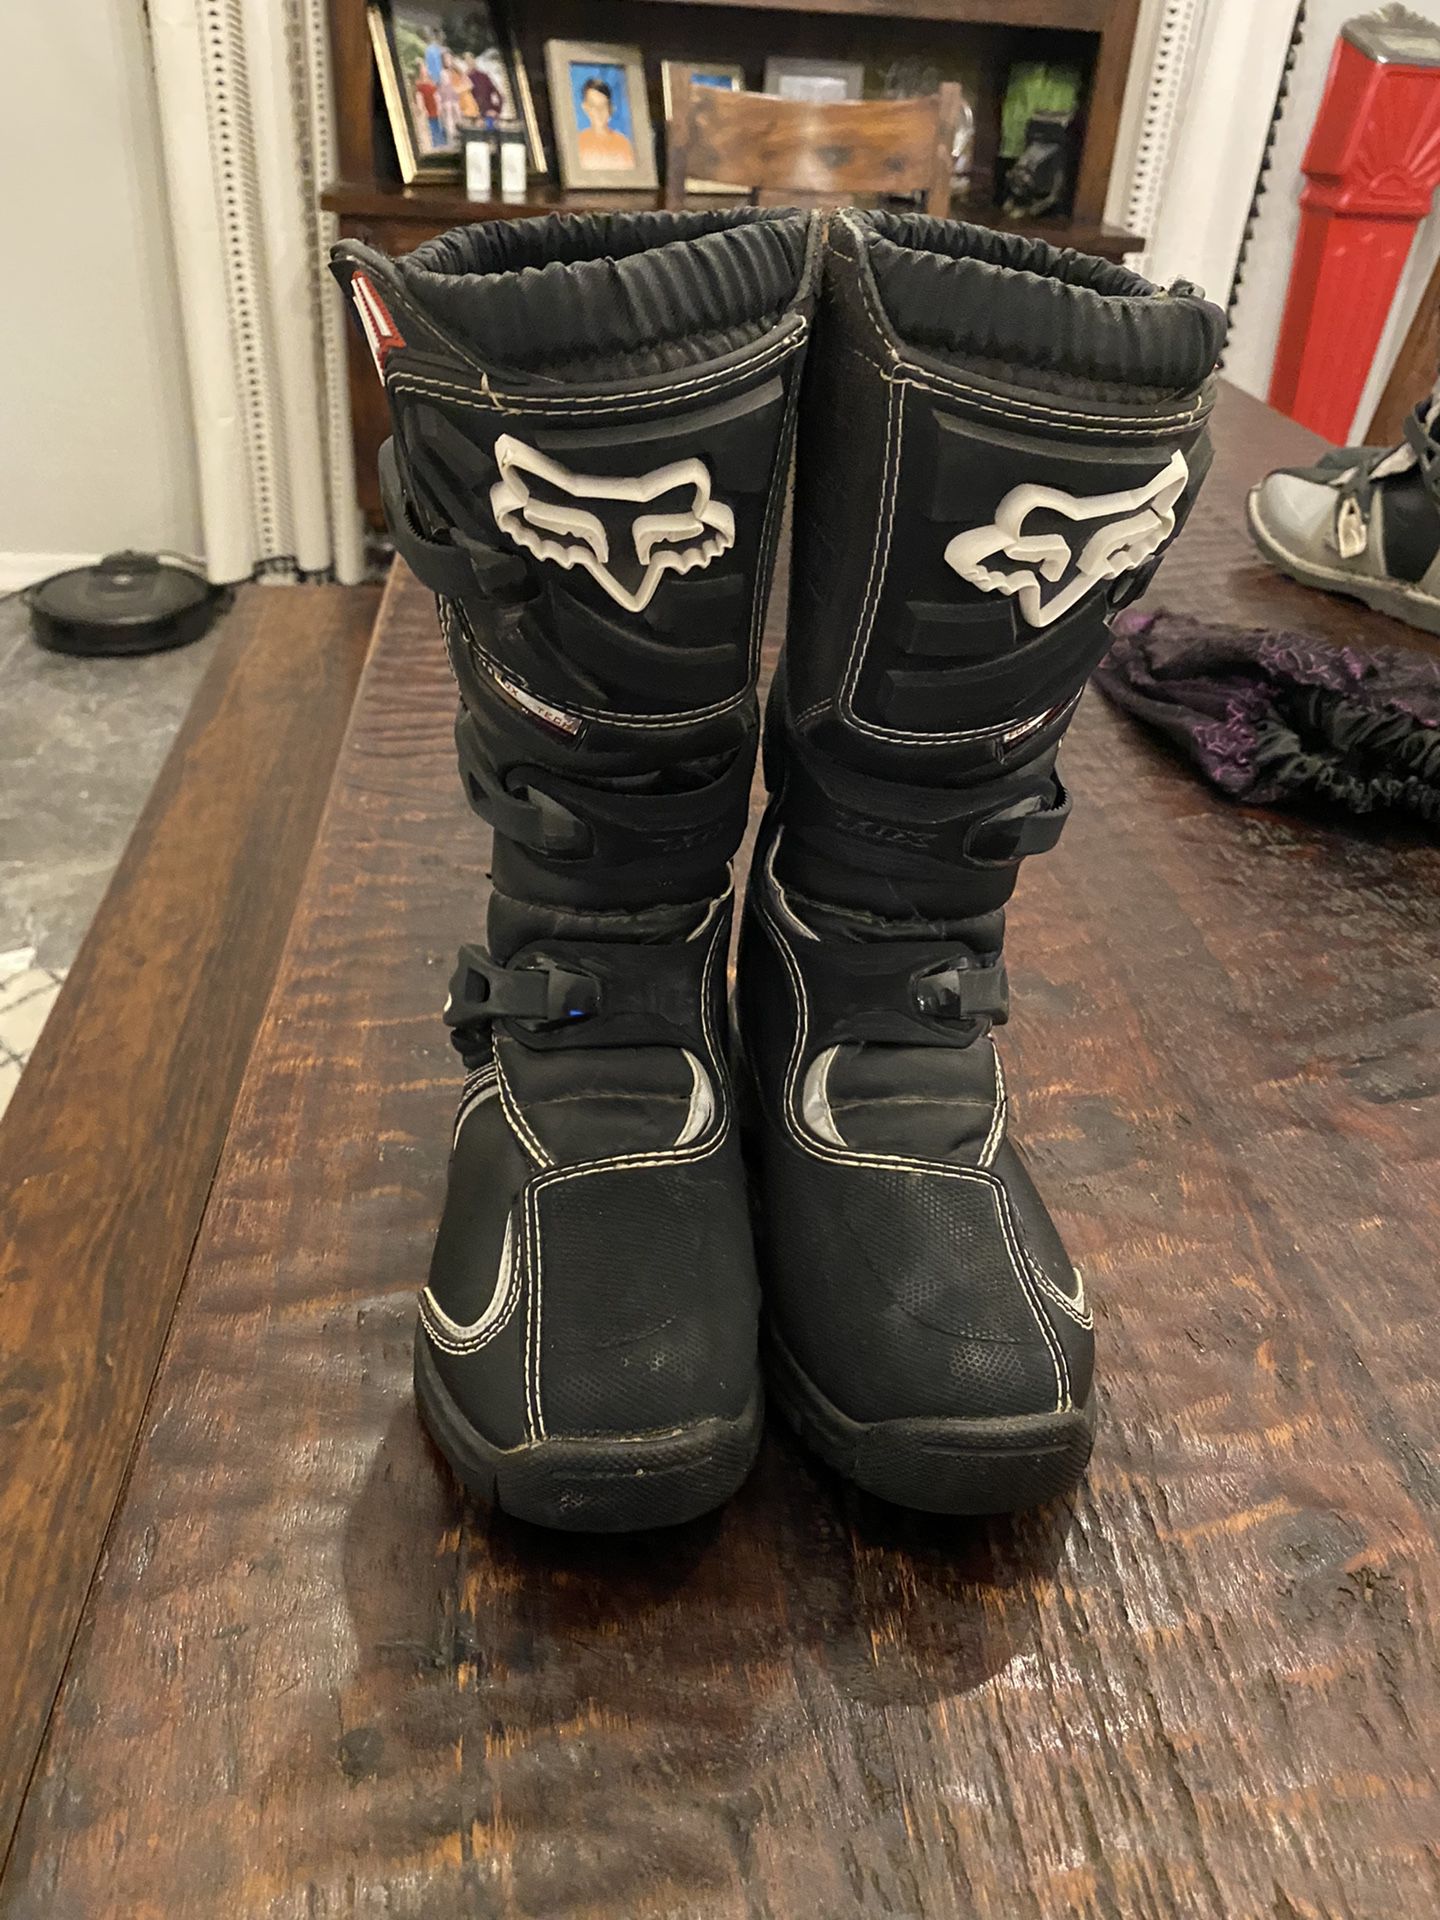 Fox Comp 5 Youth Size 4 Motocross Boots 